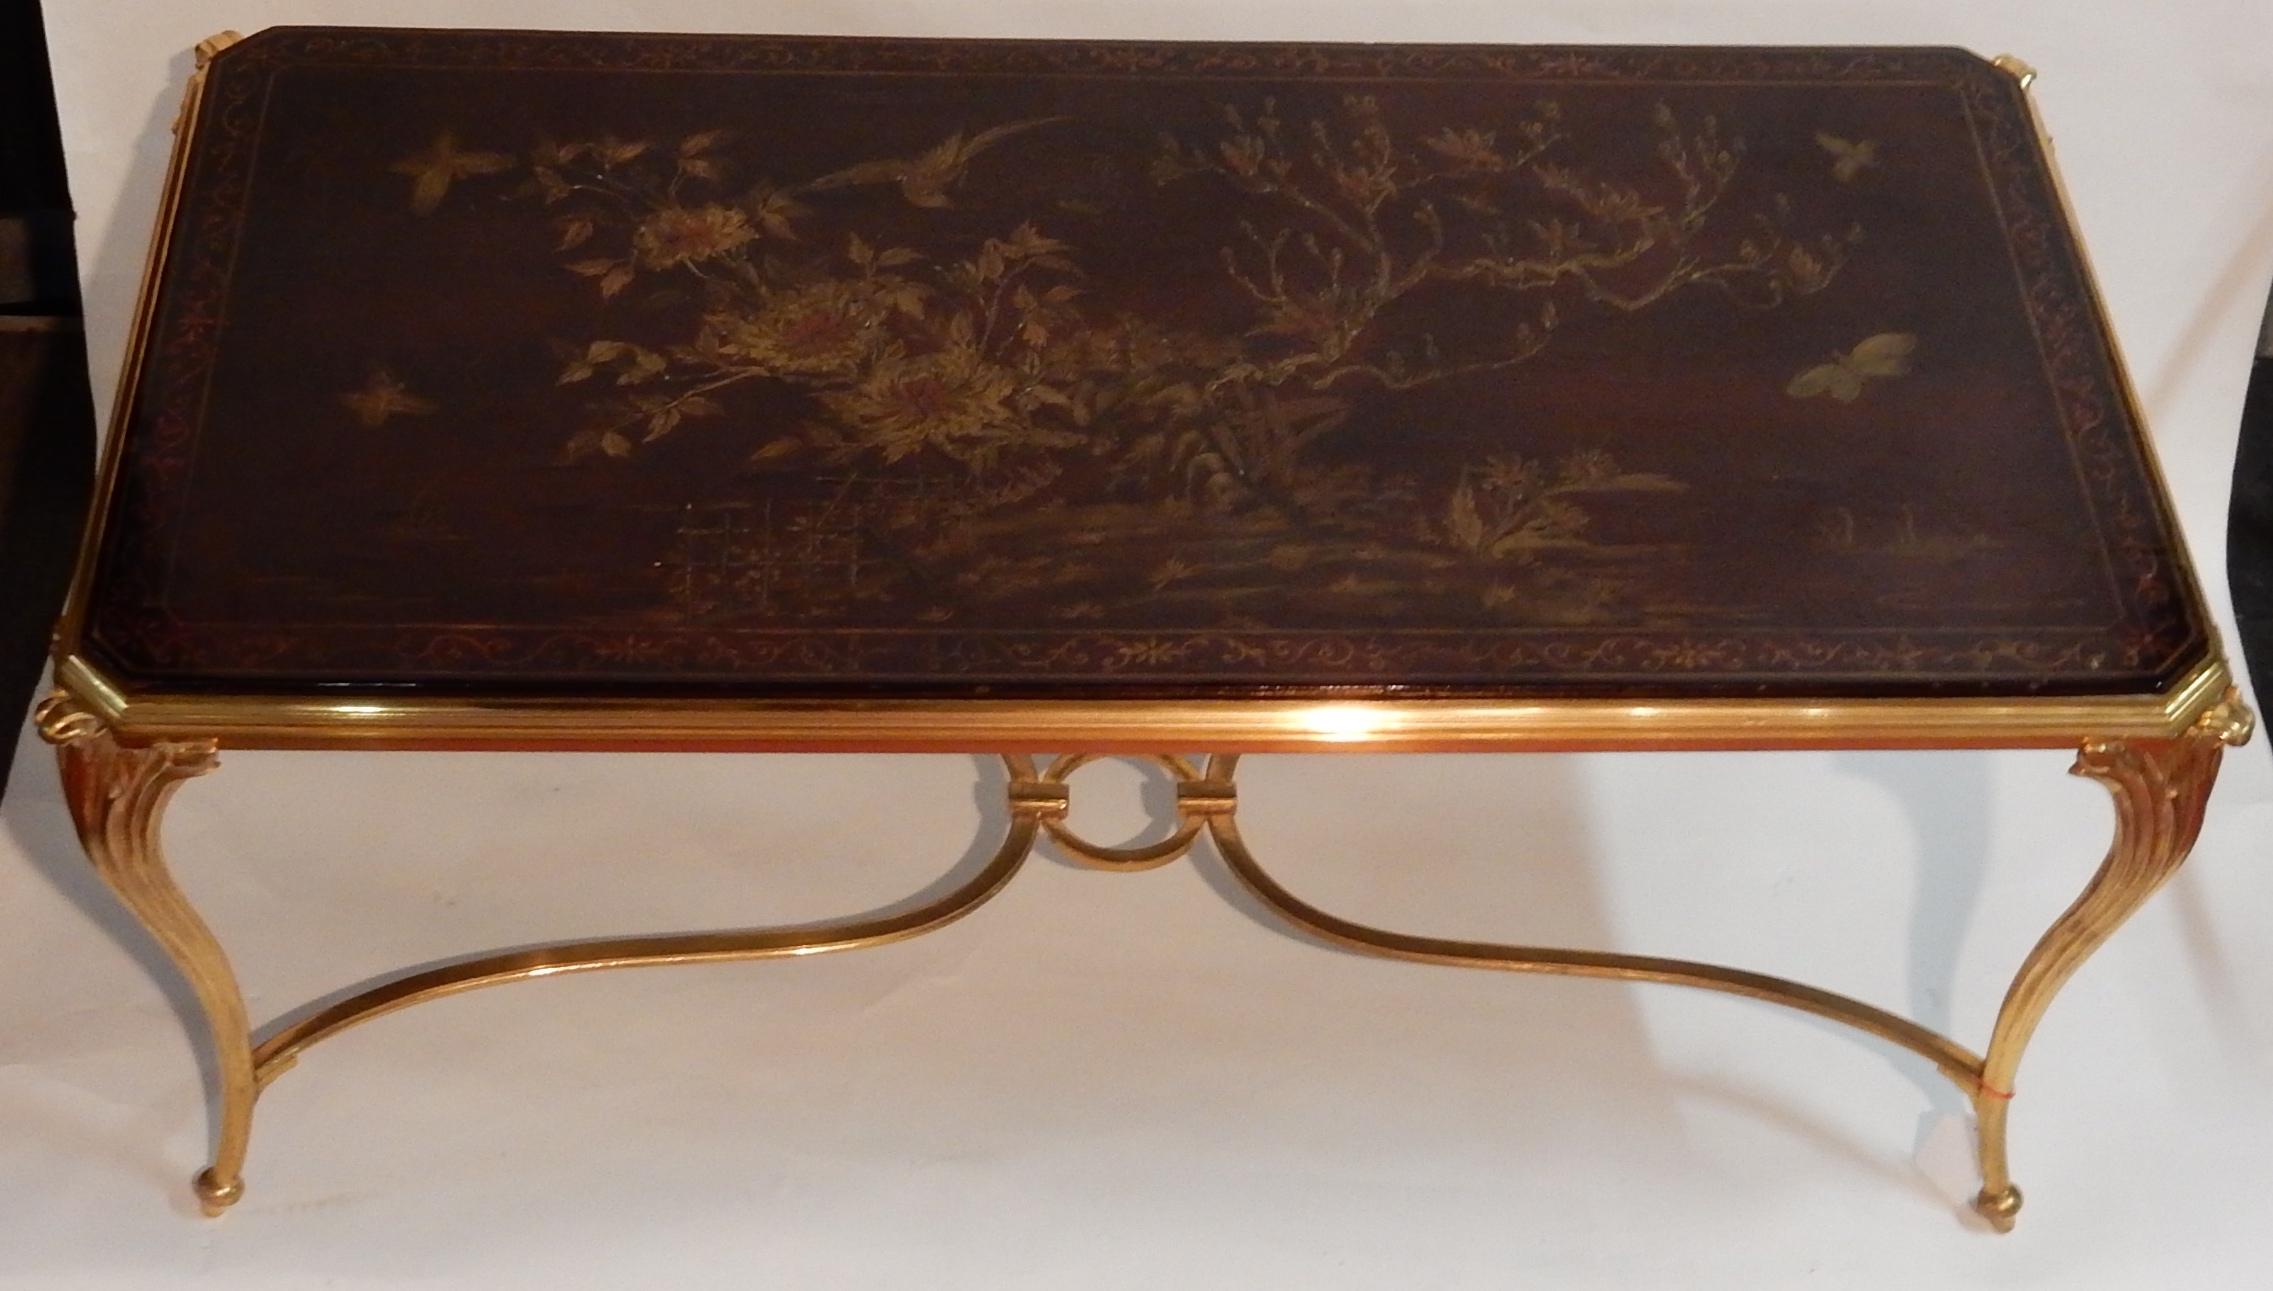 Coffee table in gilded bronze, top lacquer of china has decoration, bird, butterfly, the low part is shown solidarity by a spacer with circle in its center.
Everything is demountable easier for packaging shipping,
circa 1940-1950, good condition.